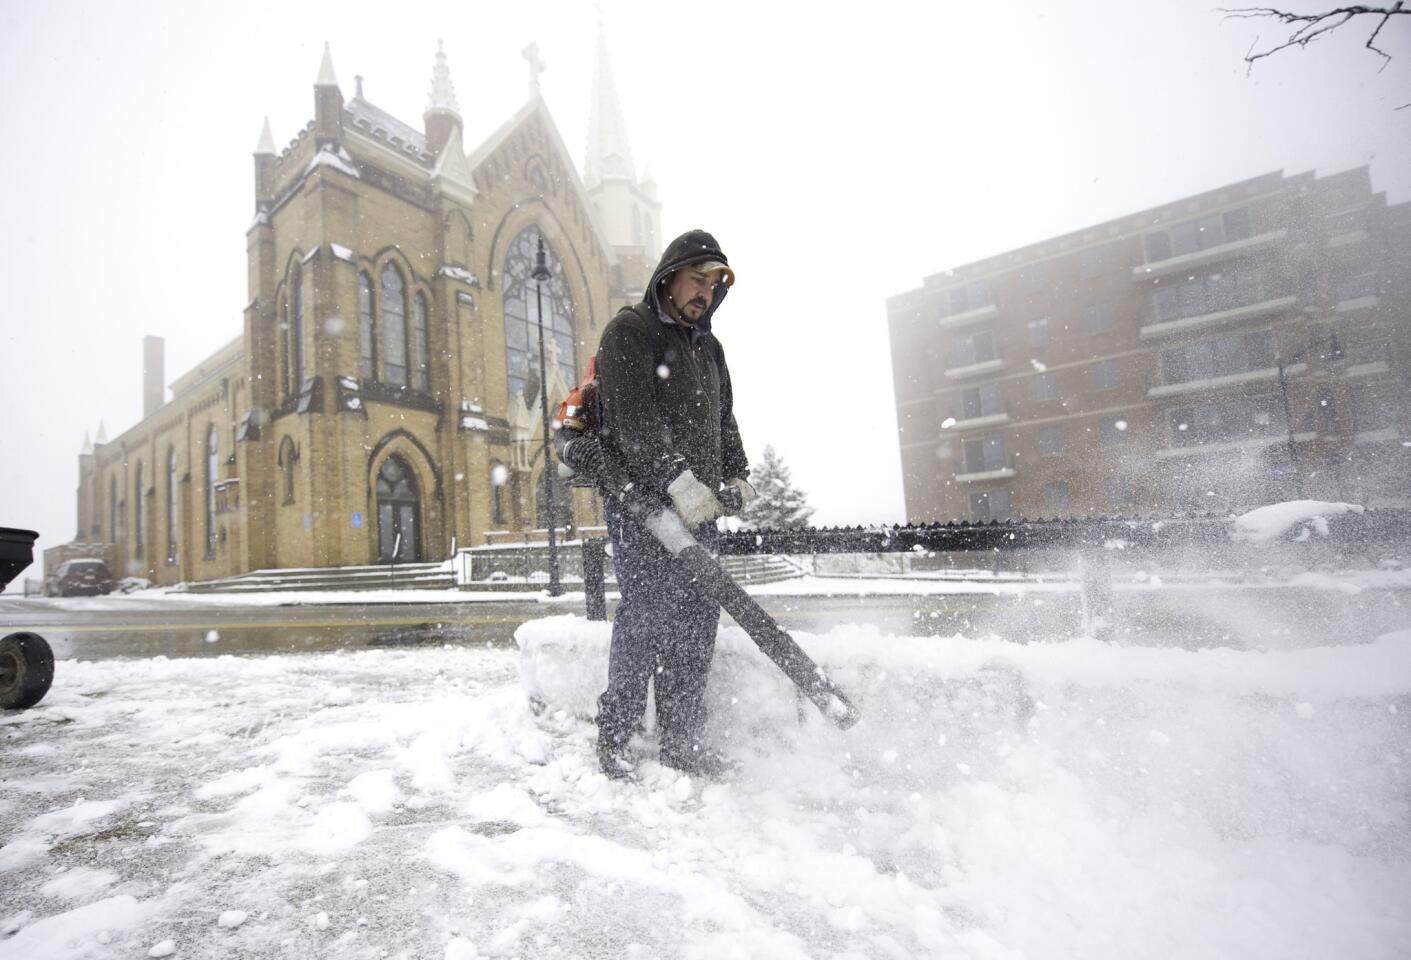 Mark Swigart uses a leaf blower to remove snow from the sidewalk along Grandview Avenue in Pittsburgh. Along the East Coast winter storms threatened to make Thanksgiving holiday travel dangerous.